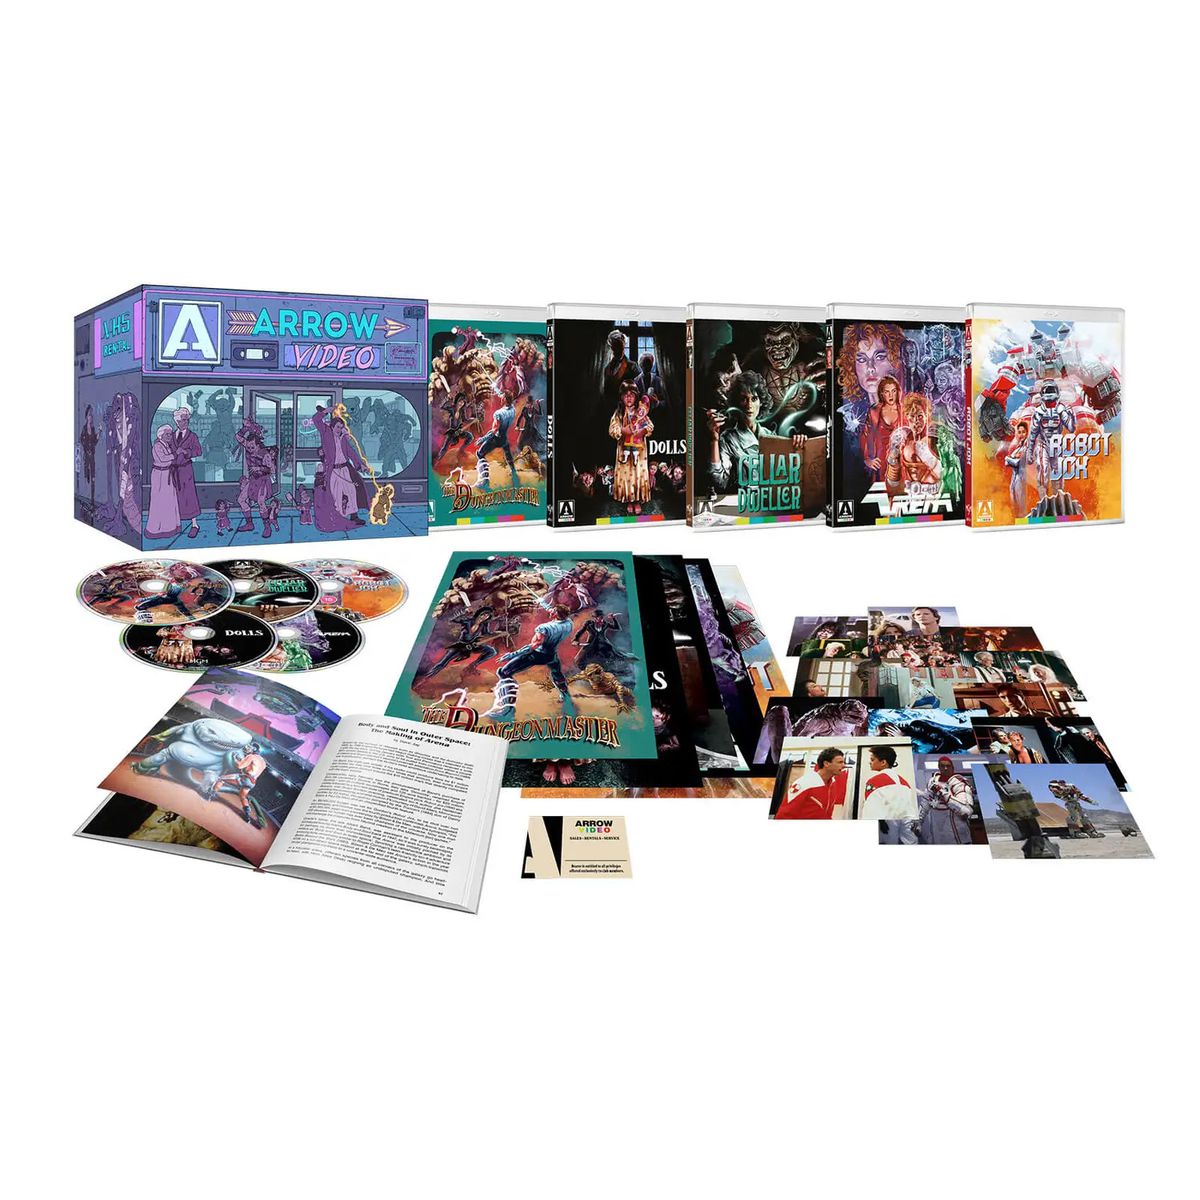 A photo of the Enter the Video Store Blu-ray box set, including a bunch of Blu-ray discs, photos, and a book.